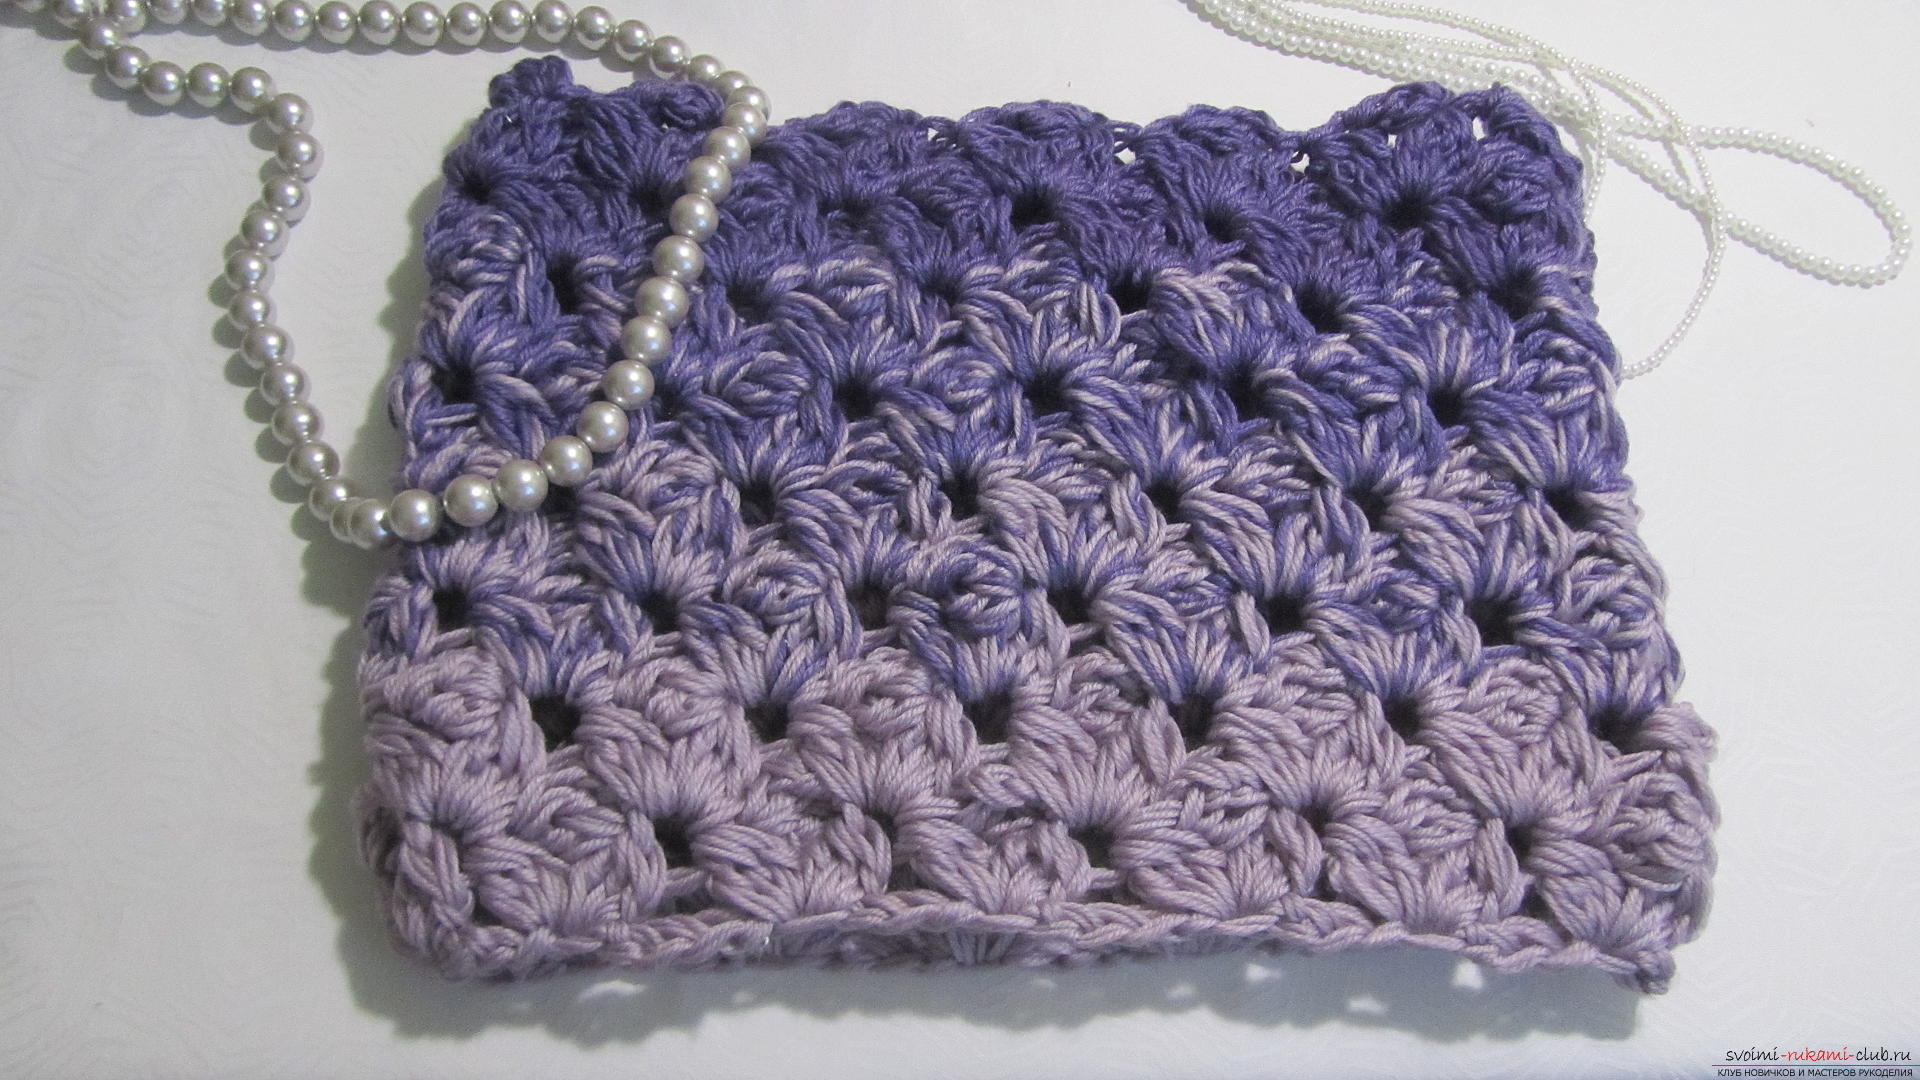 This detailed master-class with a photo contains crochet snatch crochet patterns. Picture number 1